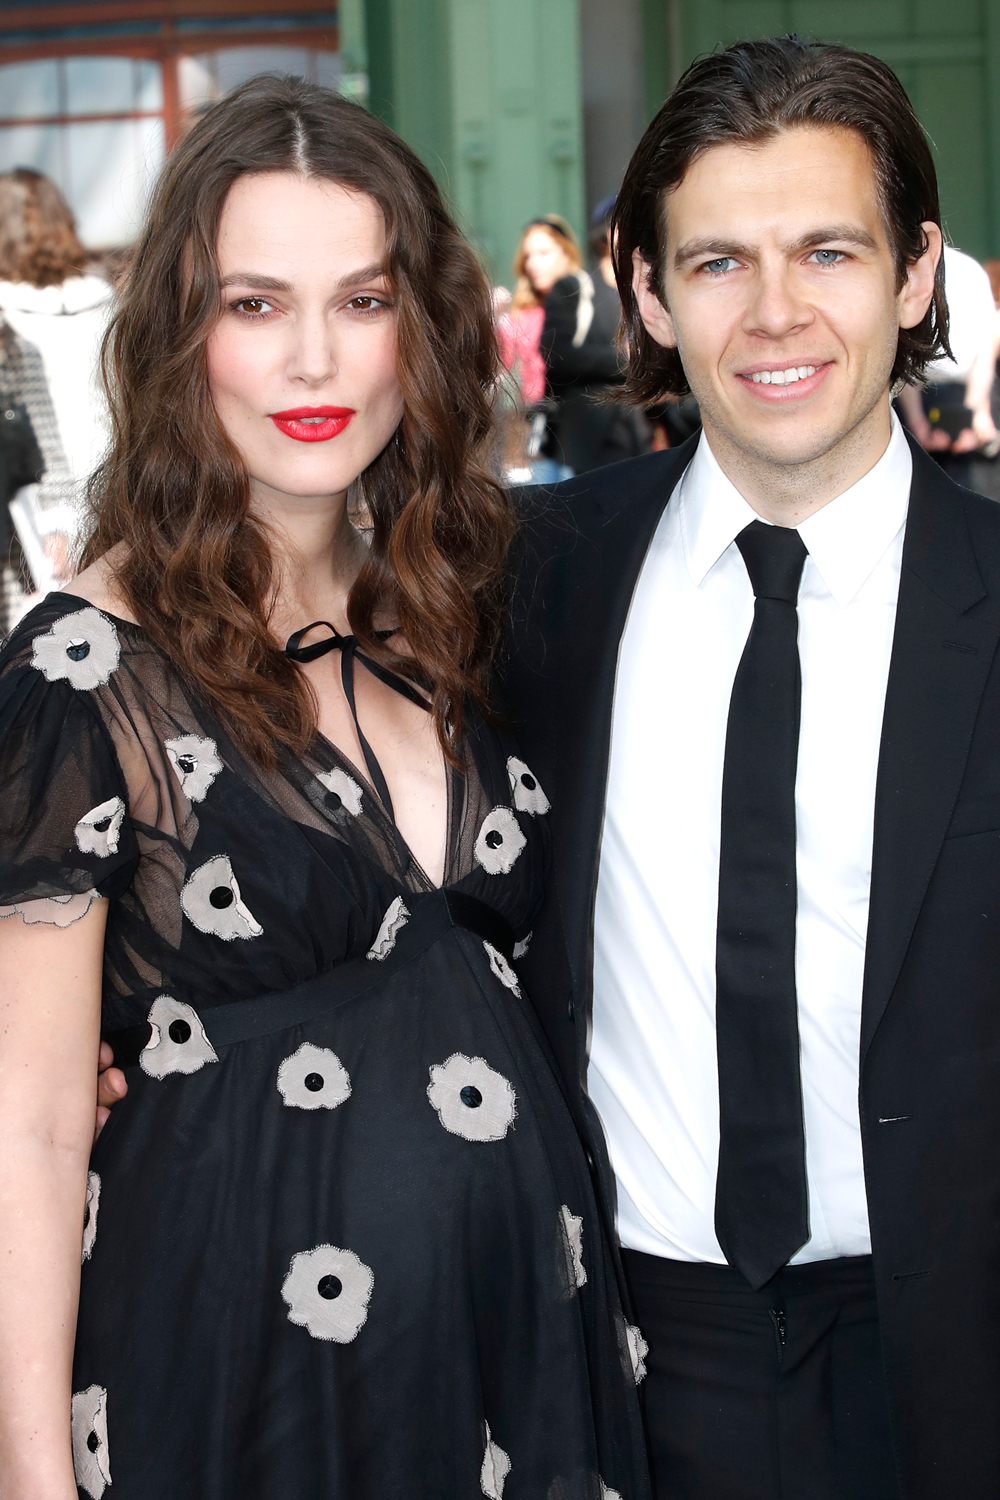 Keira Knightley and James Righton attend the Chanel Cruise 2020 Collection